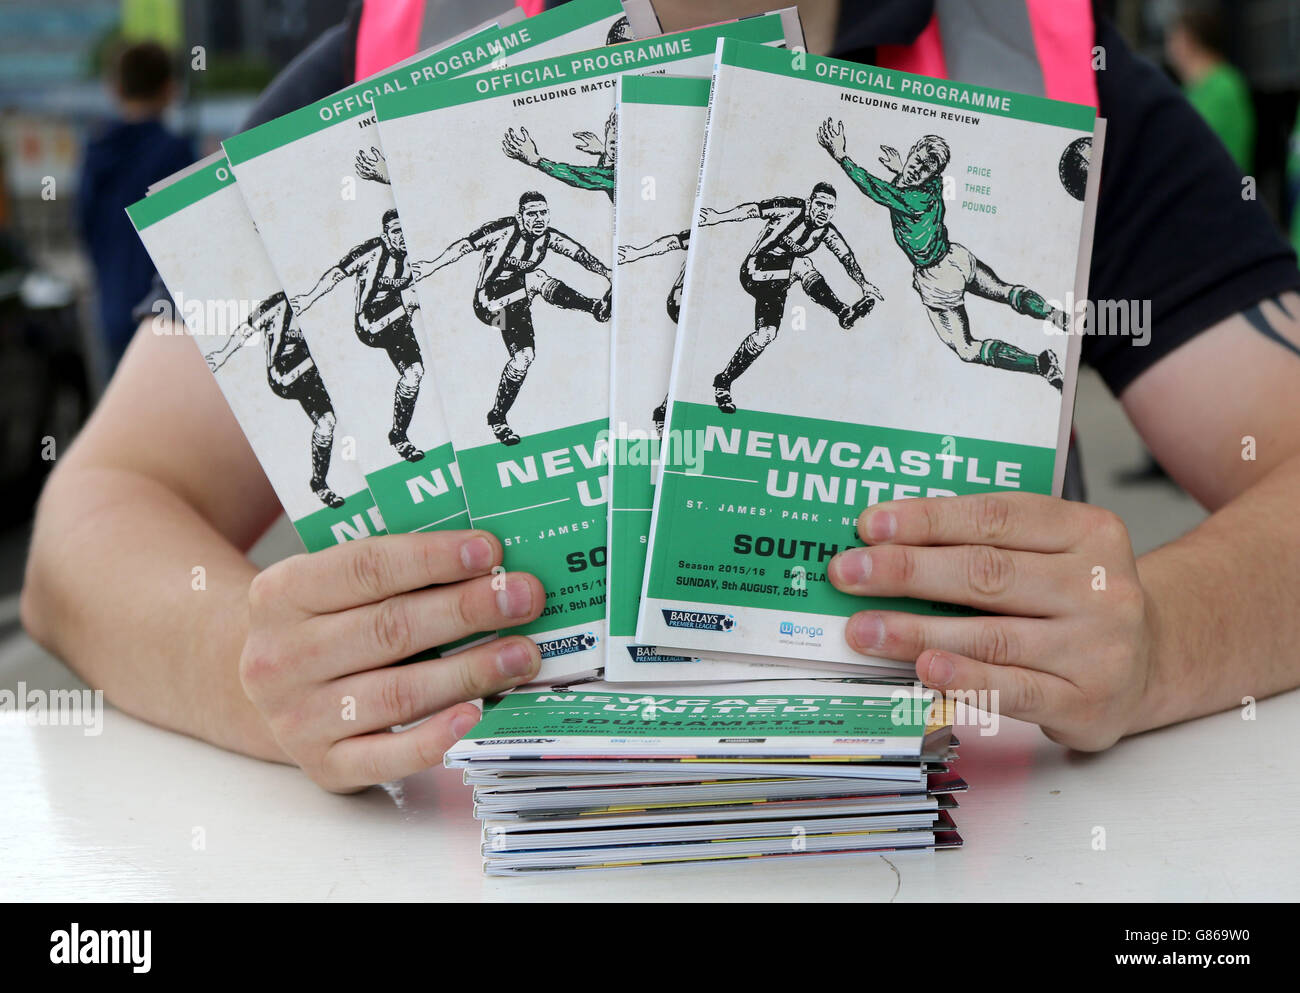 Retro Newcastle united match day programmes on sale at the Barclays Premier League match at St James' Park, Newcastle. Stock Photo